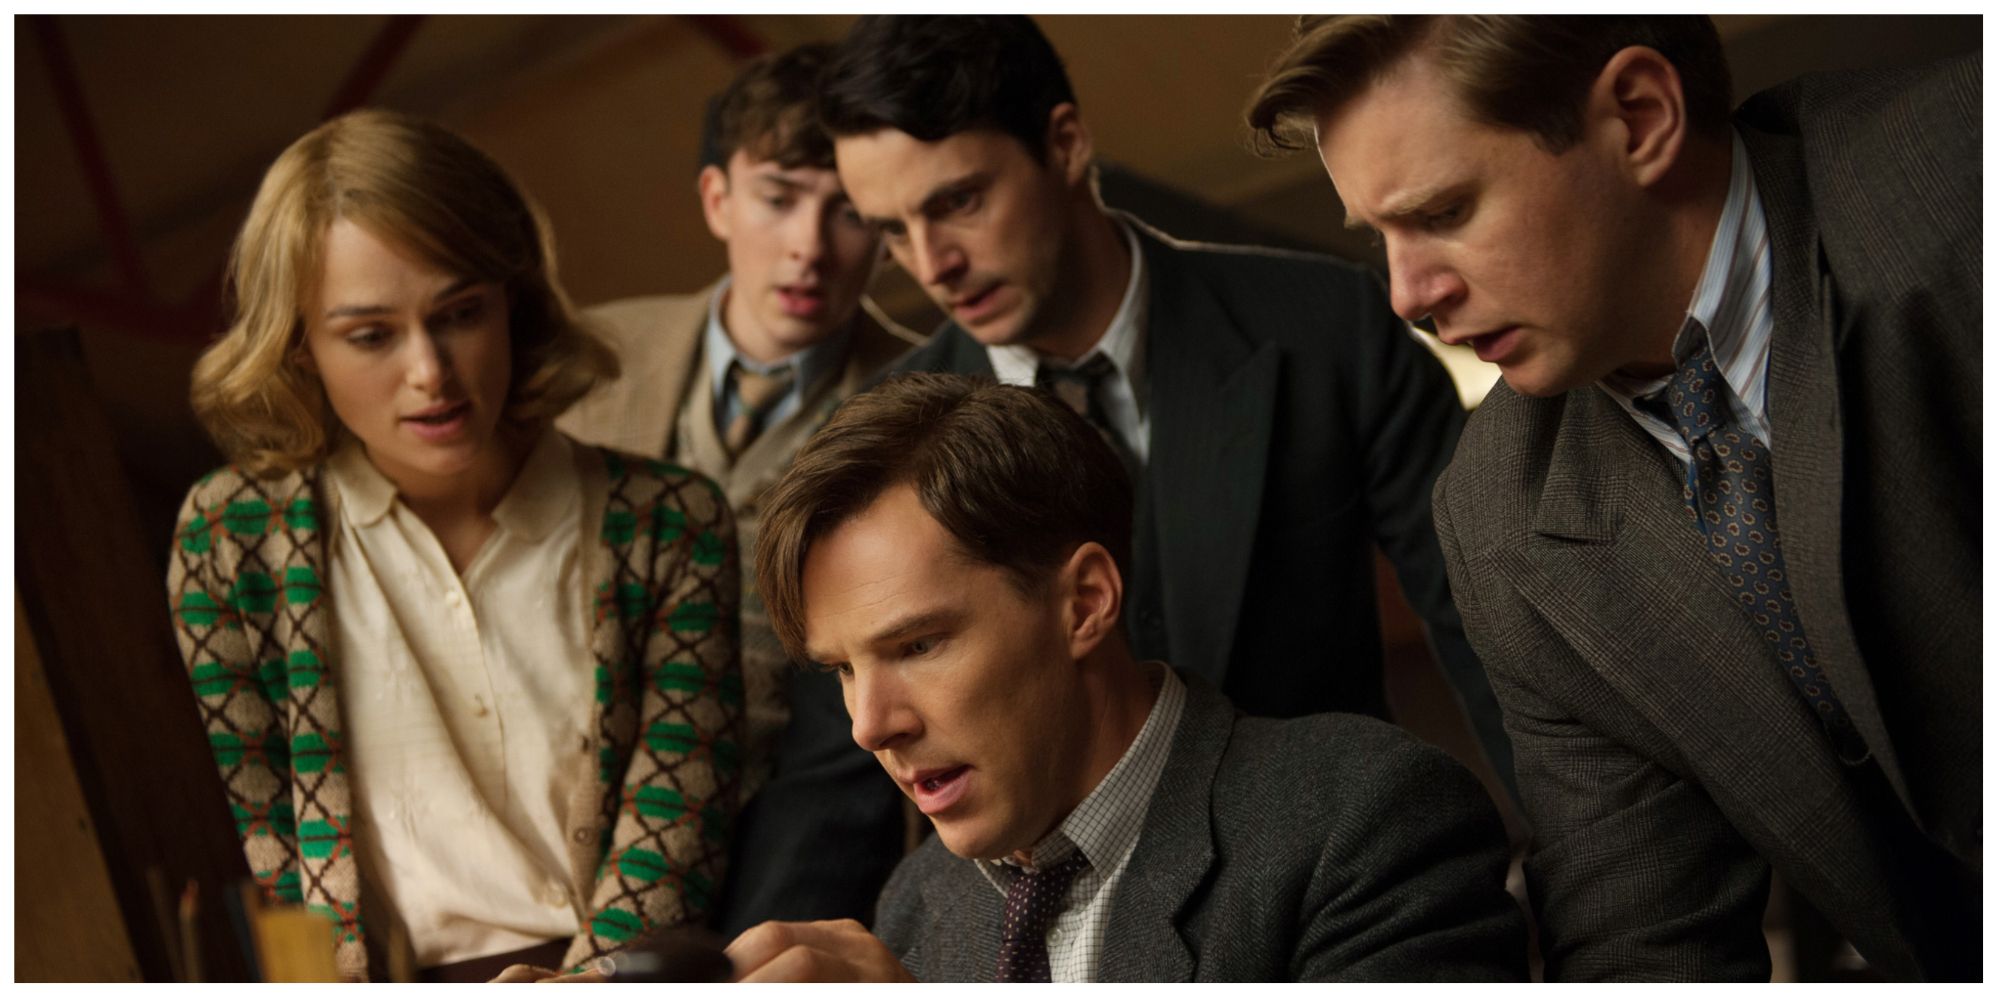 Benedict Cumberbatch as Alan Turing sat looking at something on the table surrounded by supporting cast. They all look shocked.